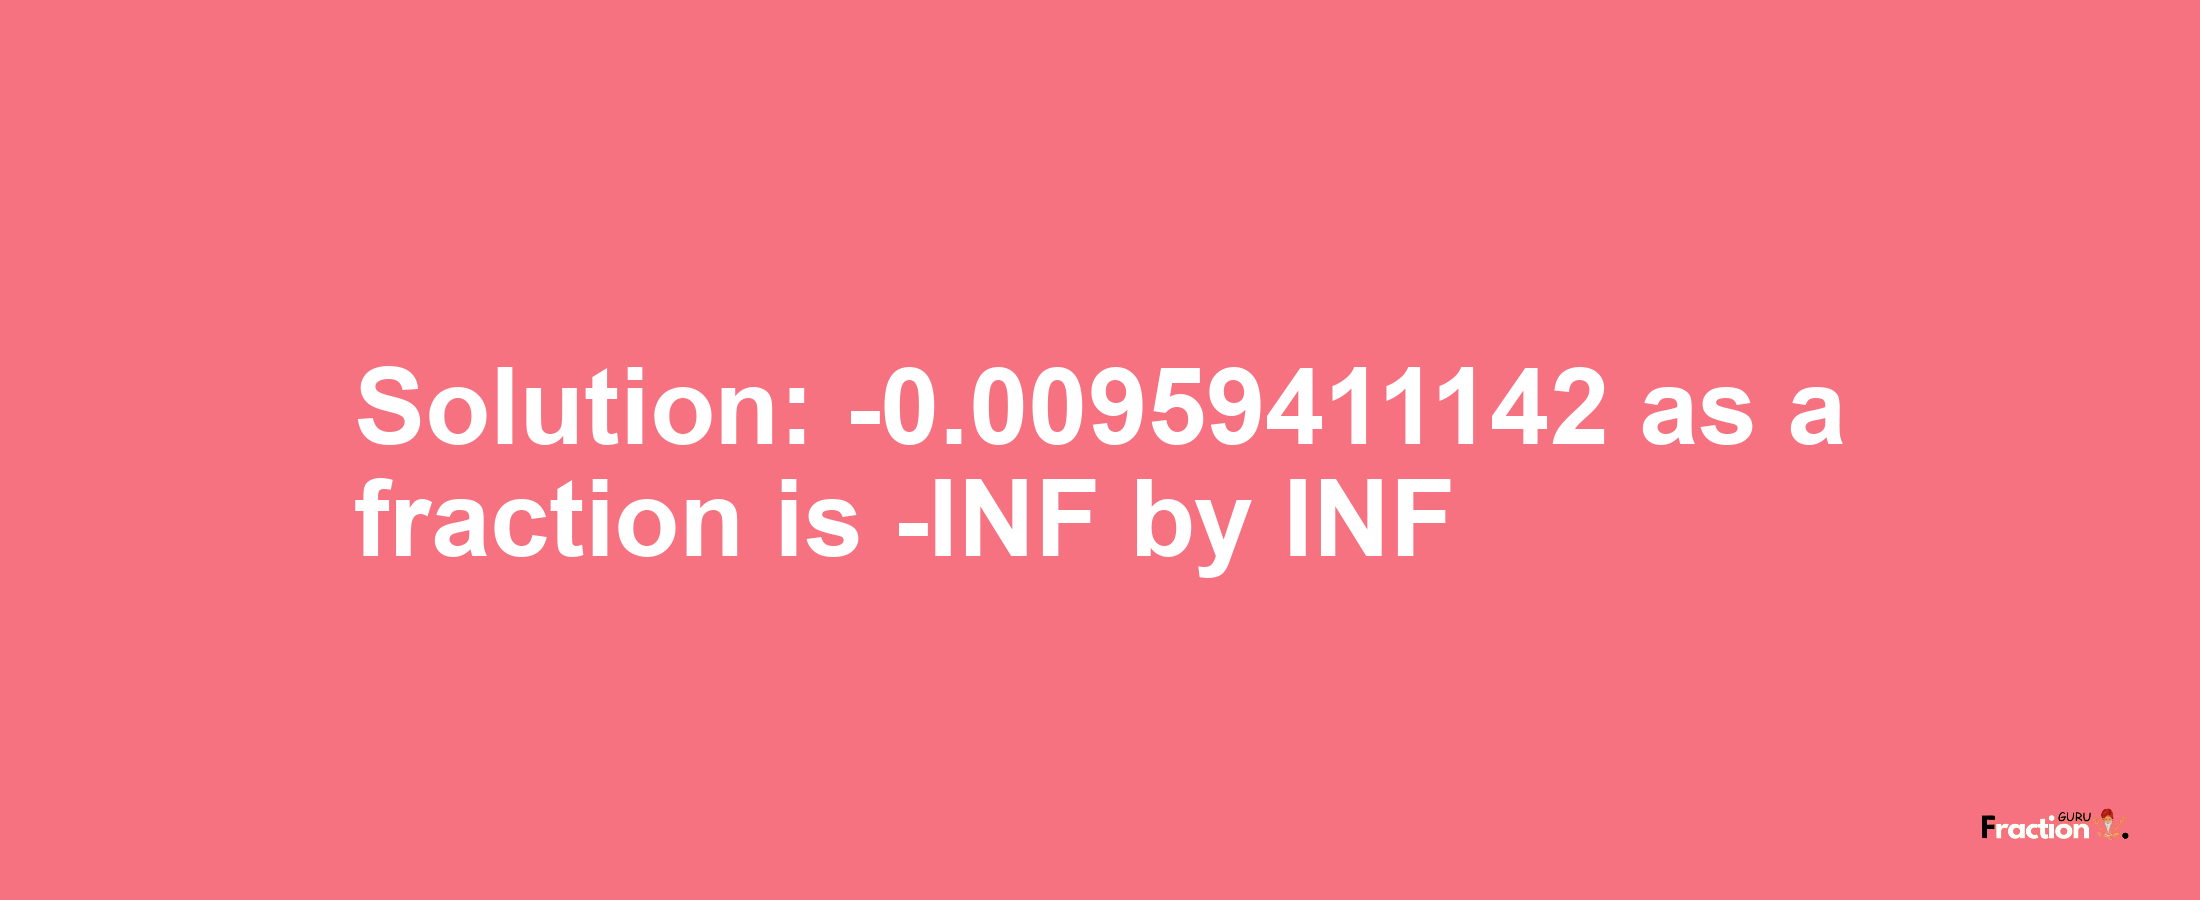 Solution:-0.00959411142 as a fraction is -INF/INF